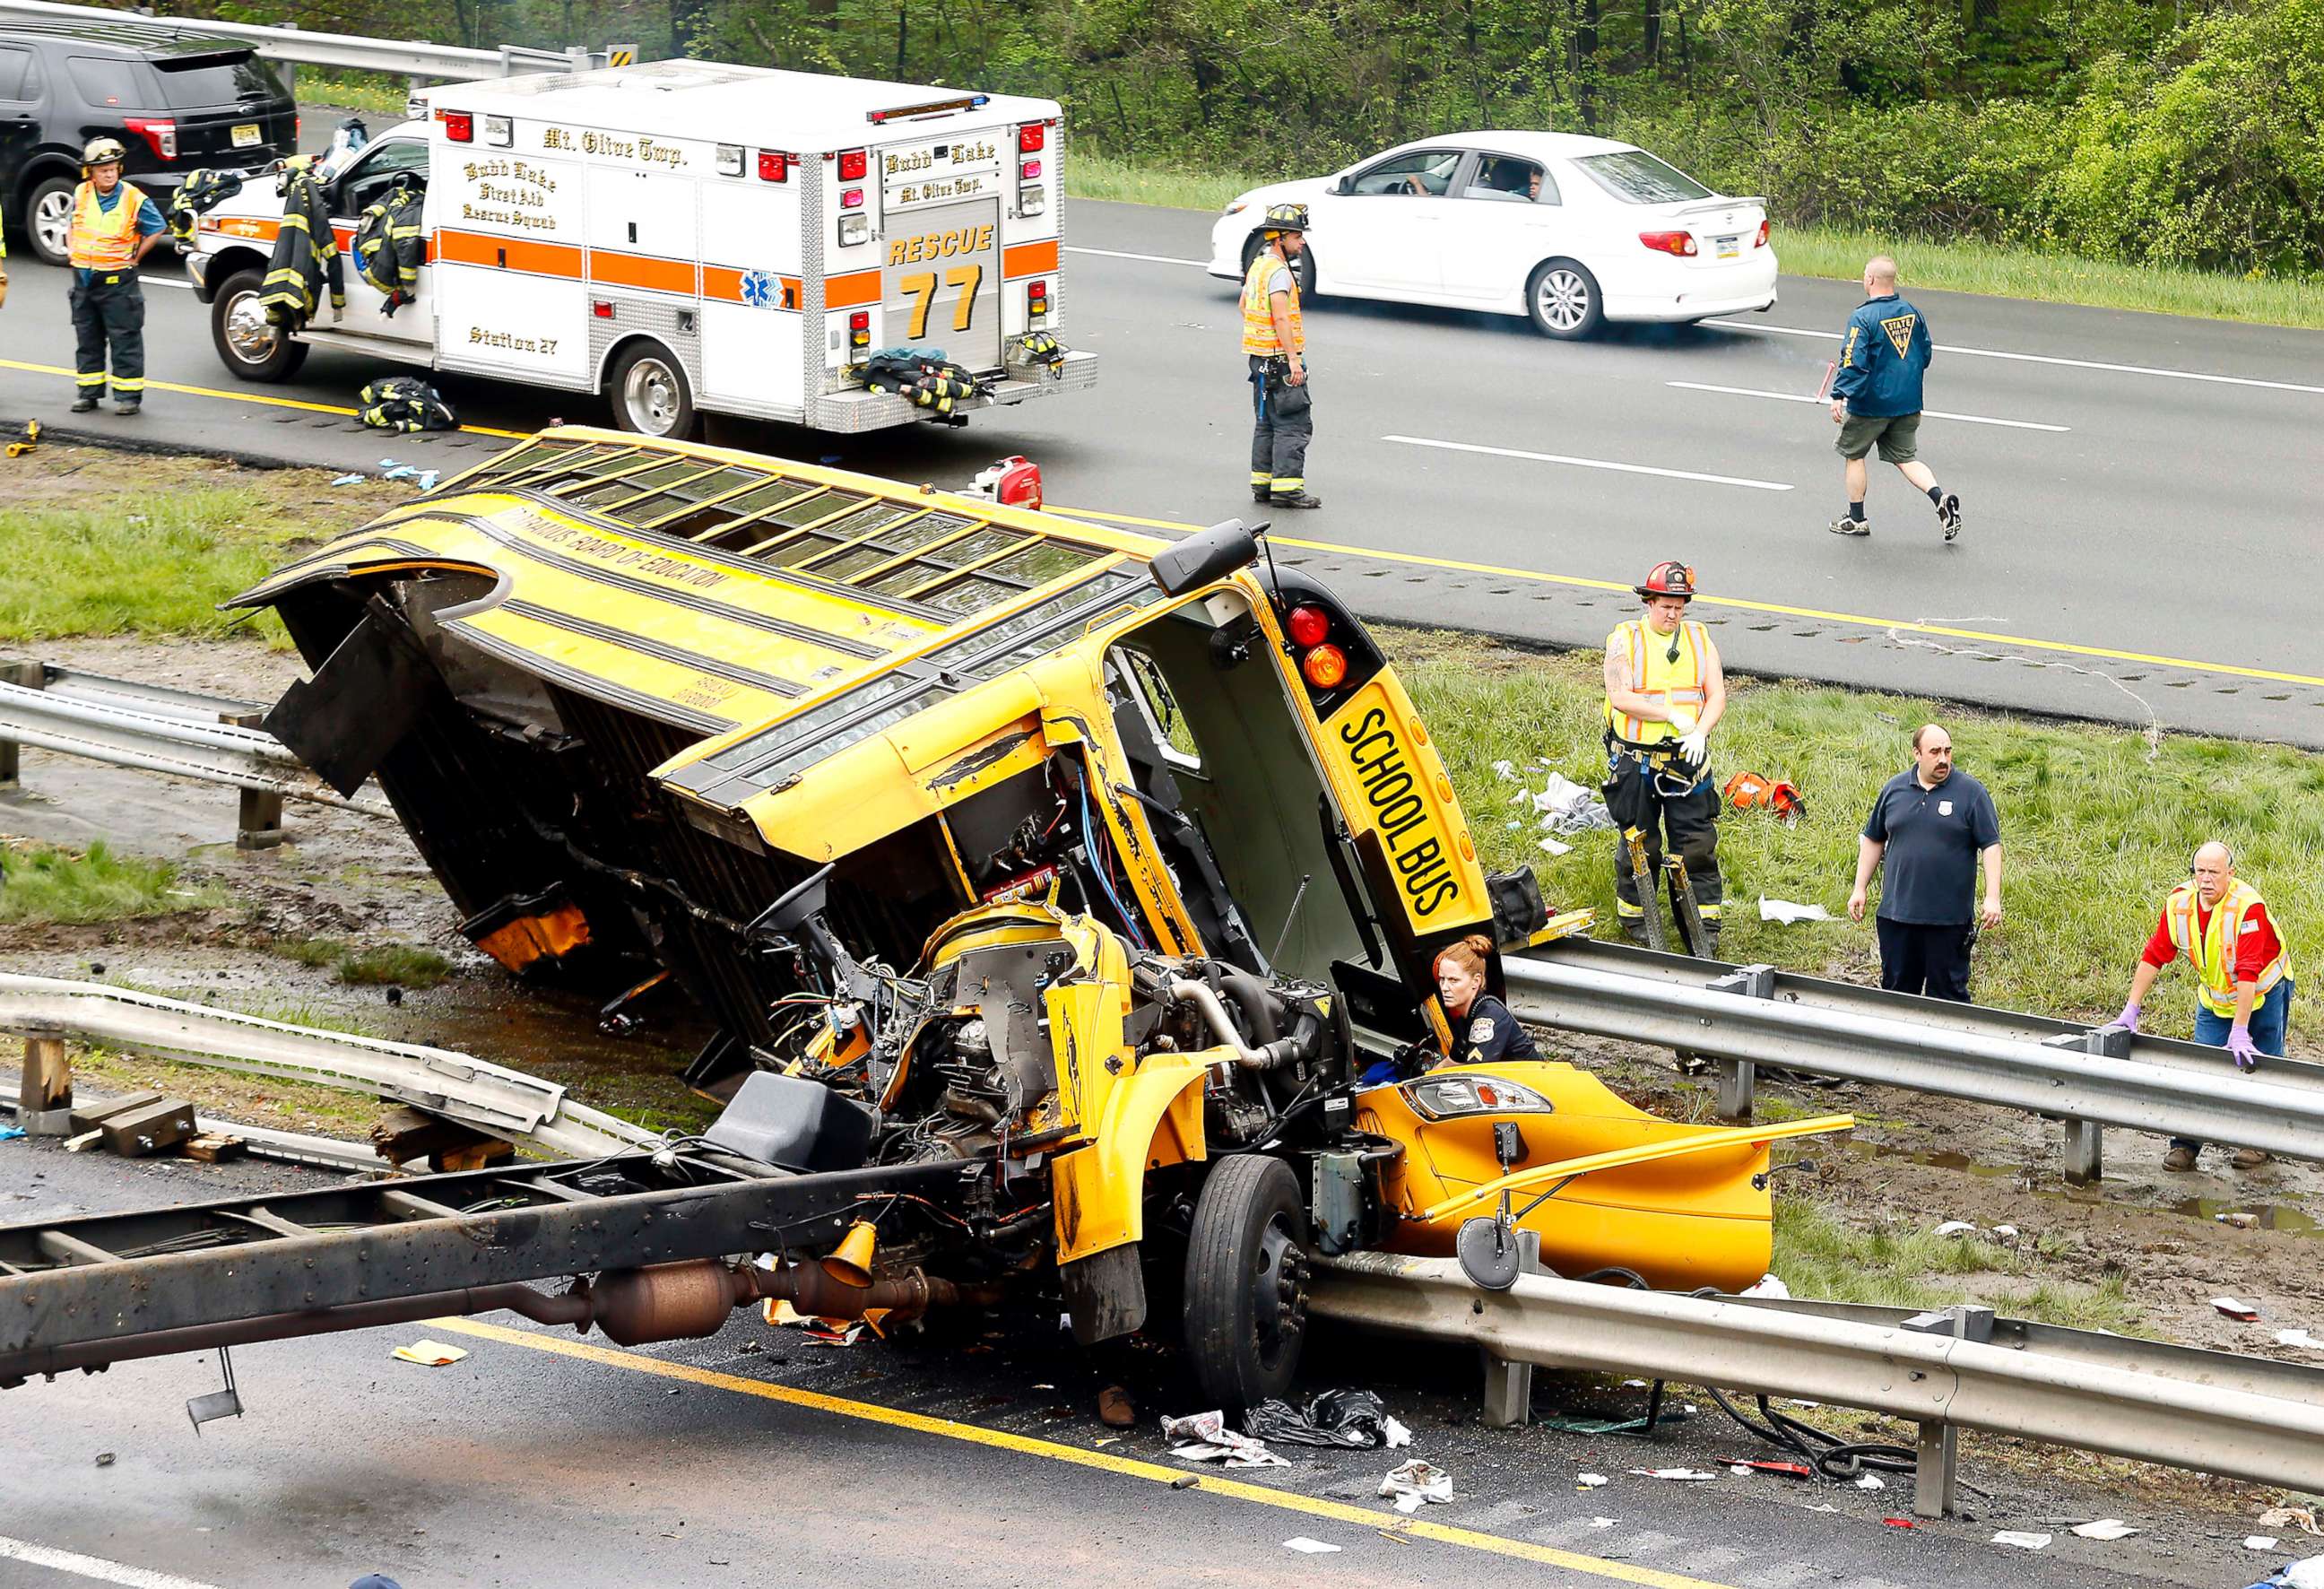 PHOTO: Multiple injuries have been reported after a serious crash between school bus carrying middle school students and dump truck on a New Jersey highway, according to police, May 17, 2018.